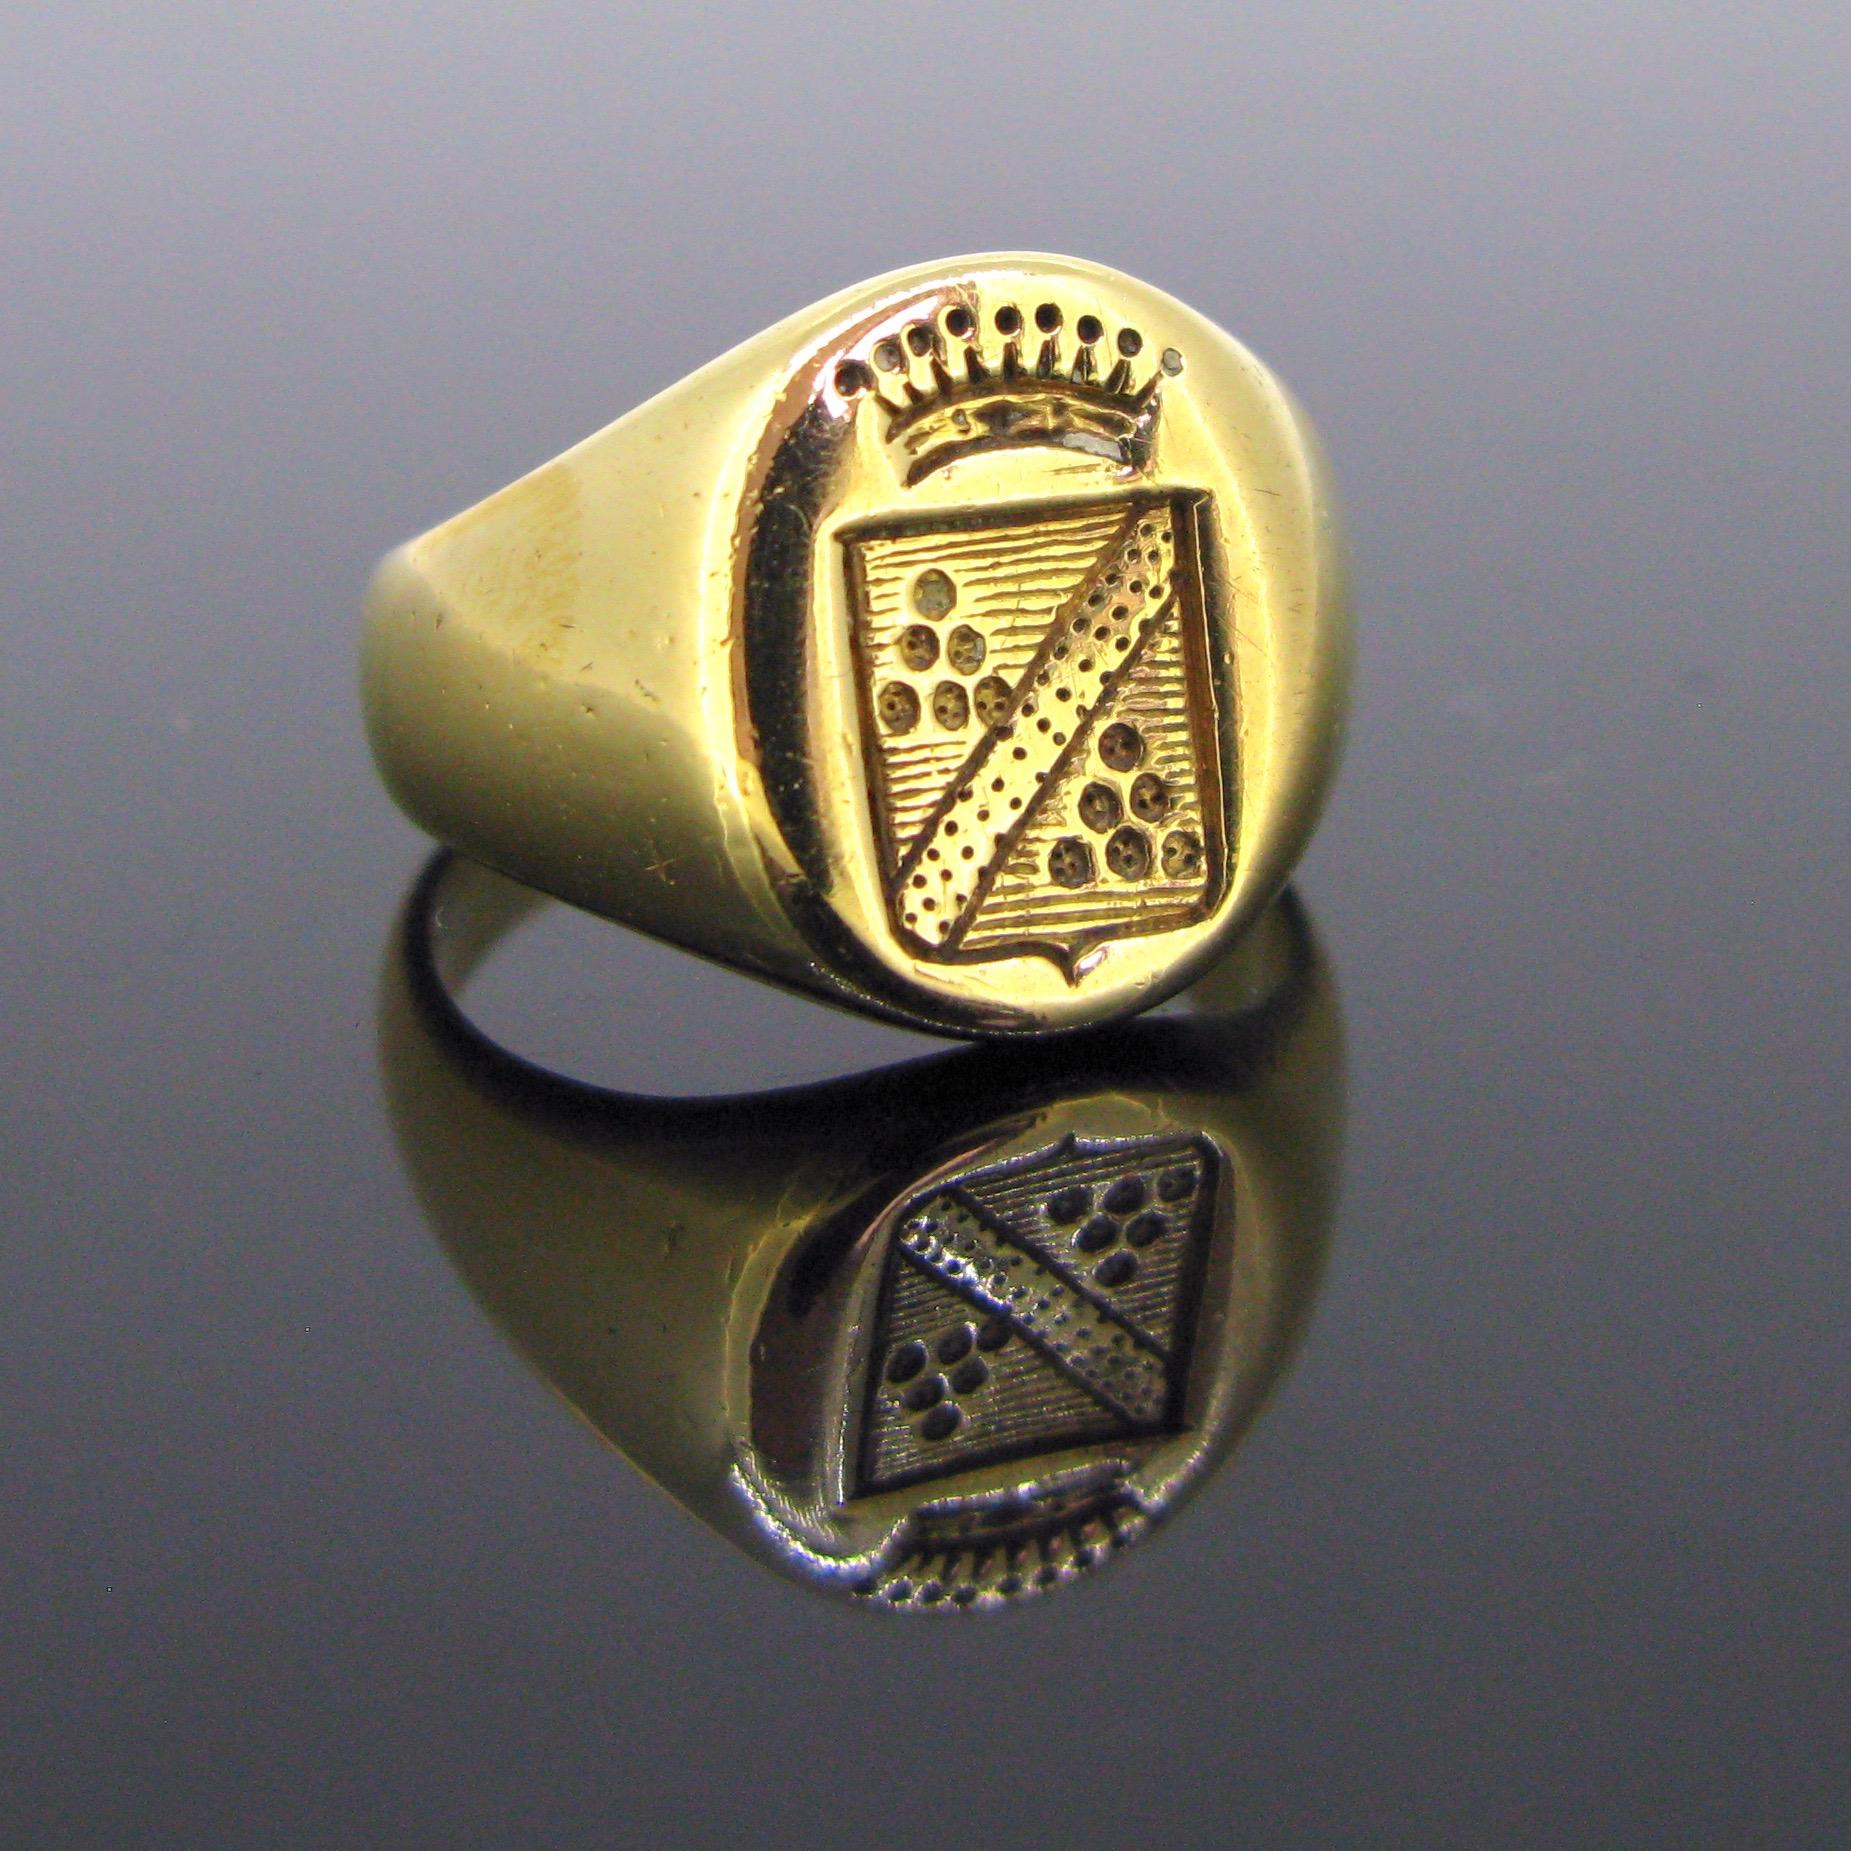 This vintage family crest ring is in very good vintage condition. It presents few traces of wears however the gold is smooth and shiny. The crest was nicely engraved. The ring was controlled with the French hallmark, the owl for 18kt yellow